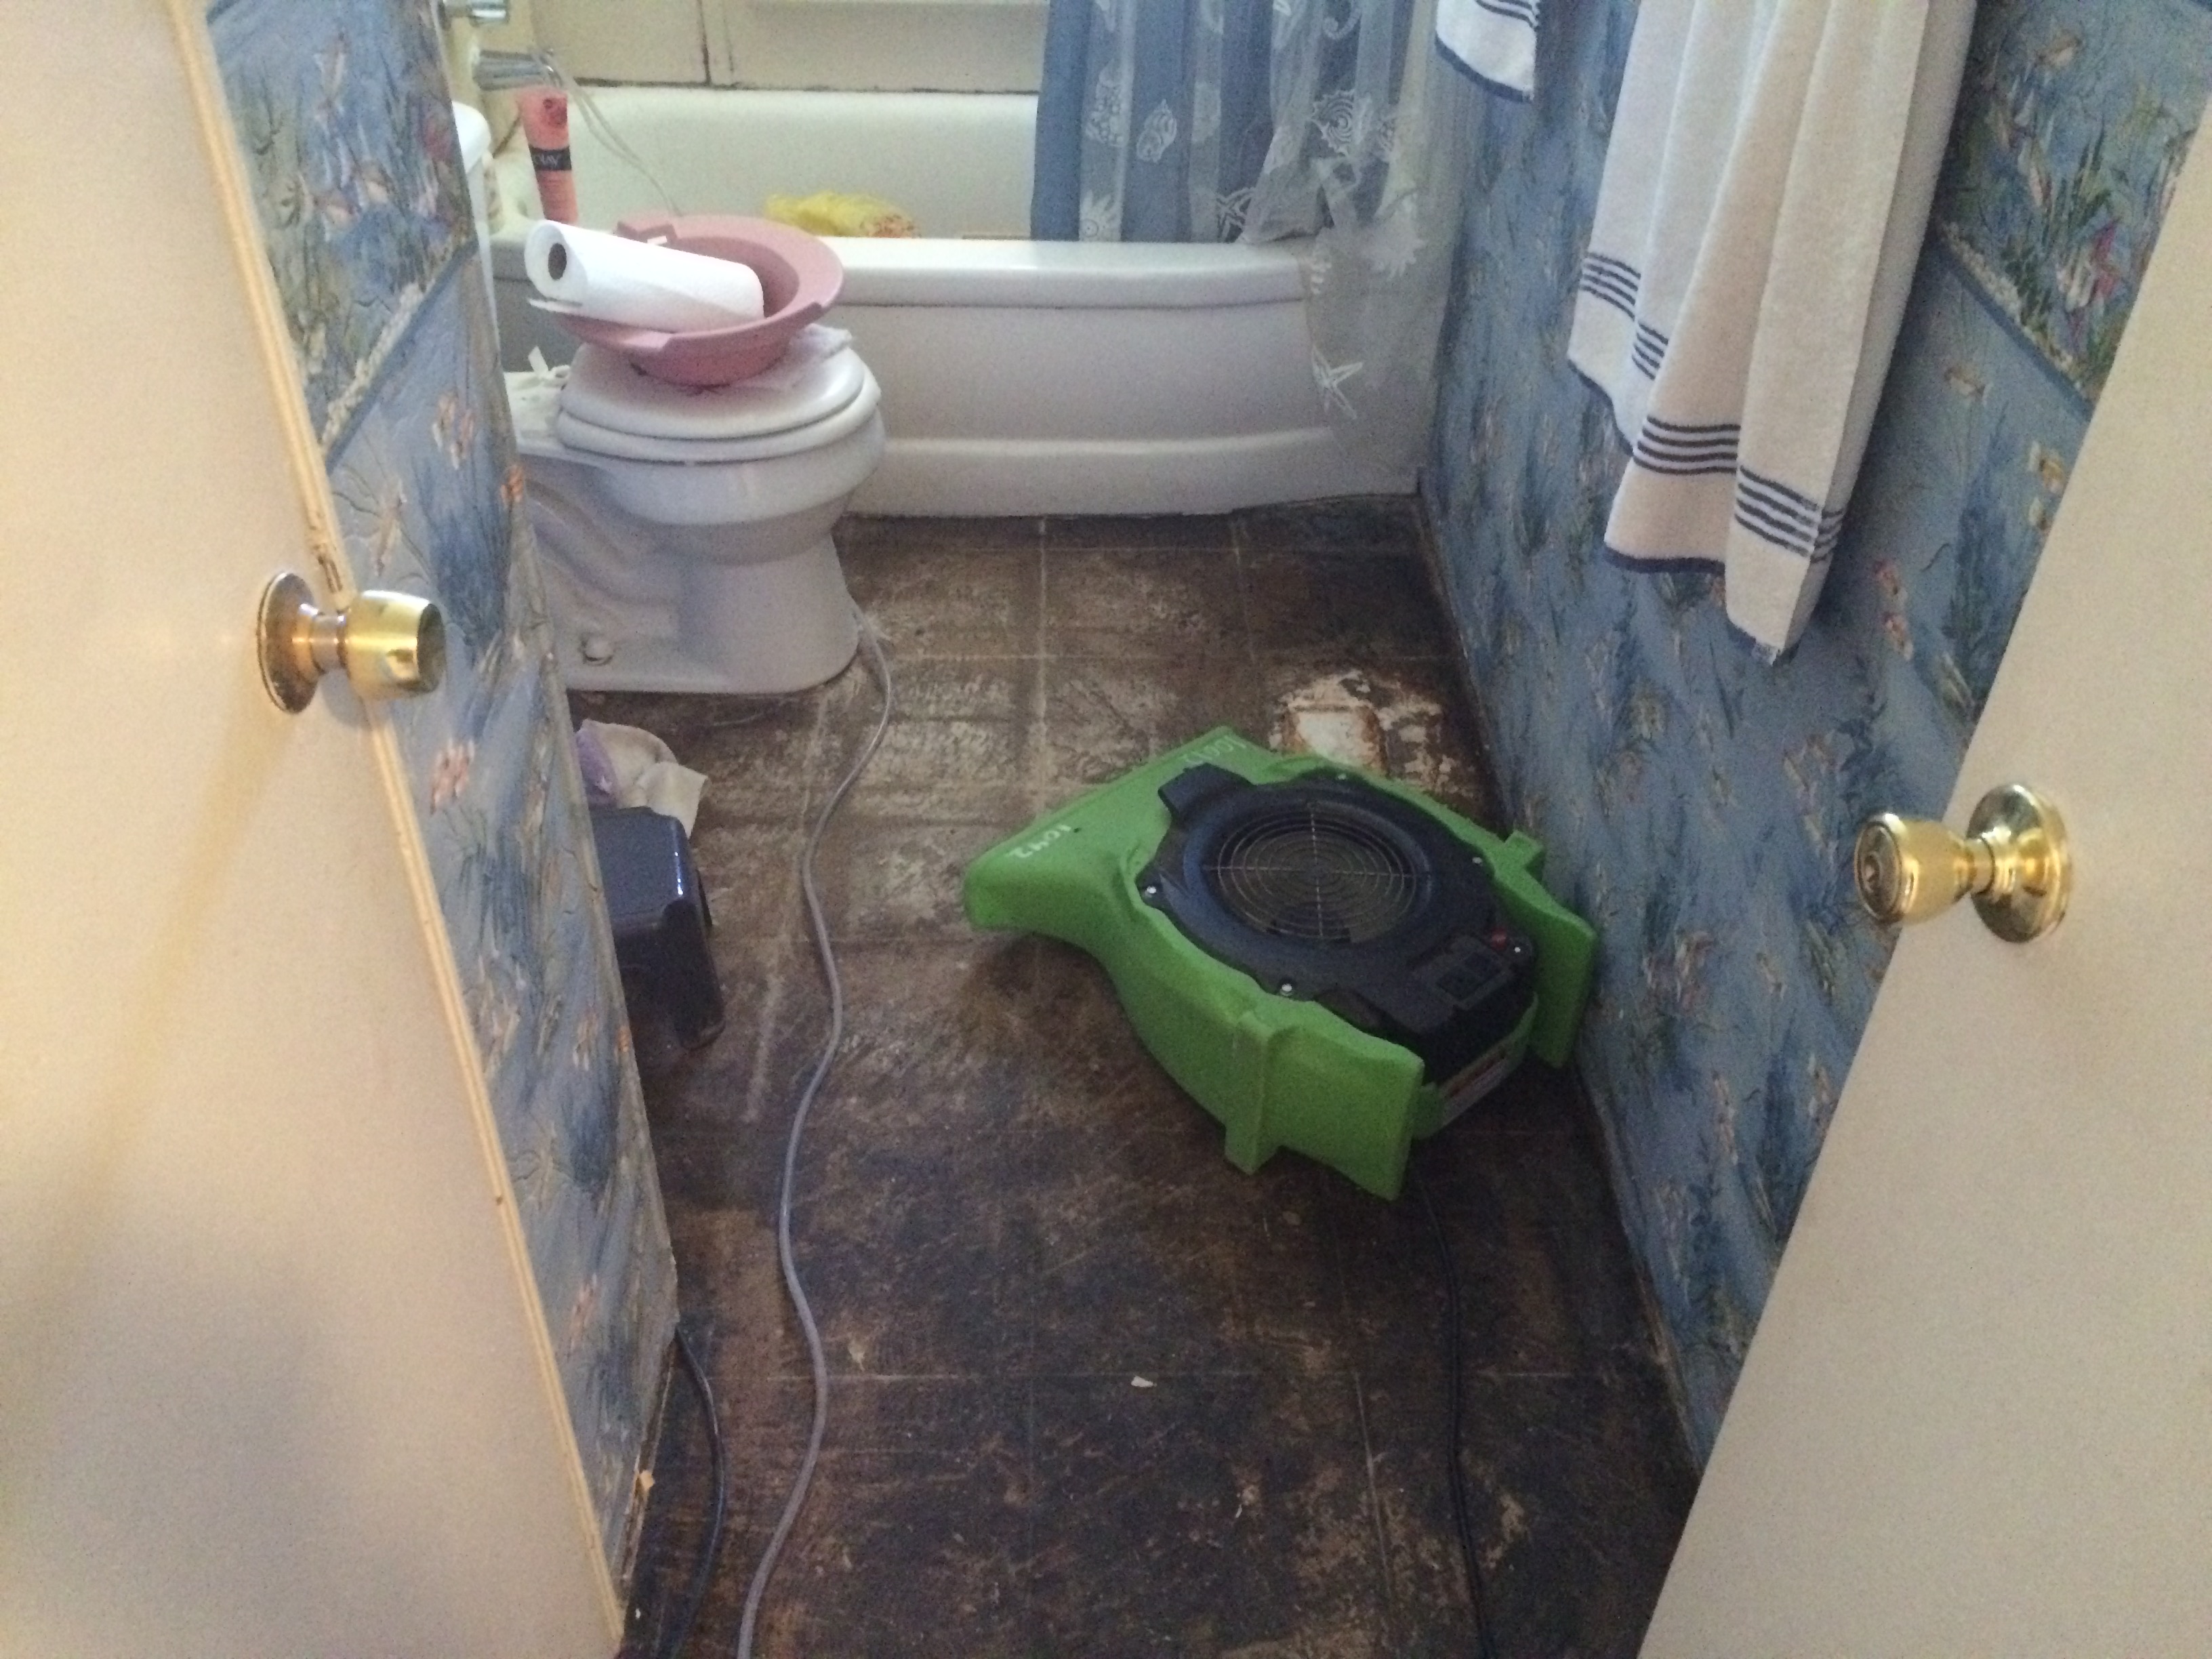 Remolding due to a water leak is never an easy process. Call SERVPRO of Northwest St.Louis County to ensure the clean up is quick!